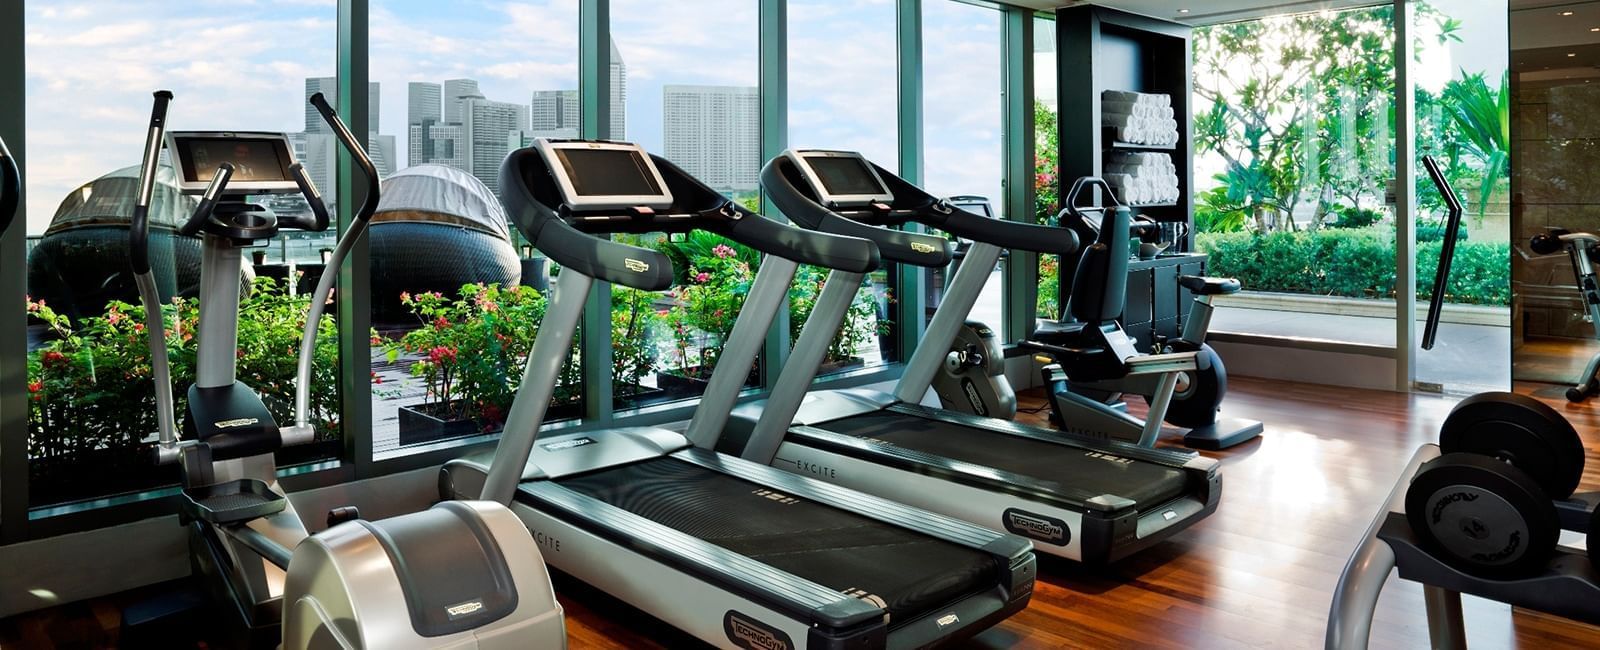 The treadmill machines at the gym and fitness center